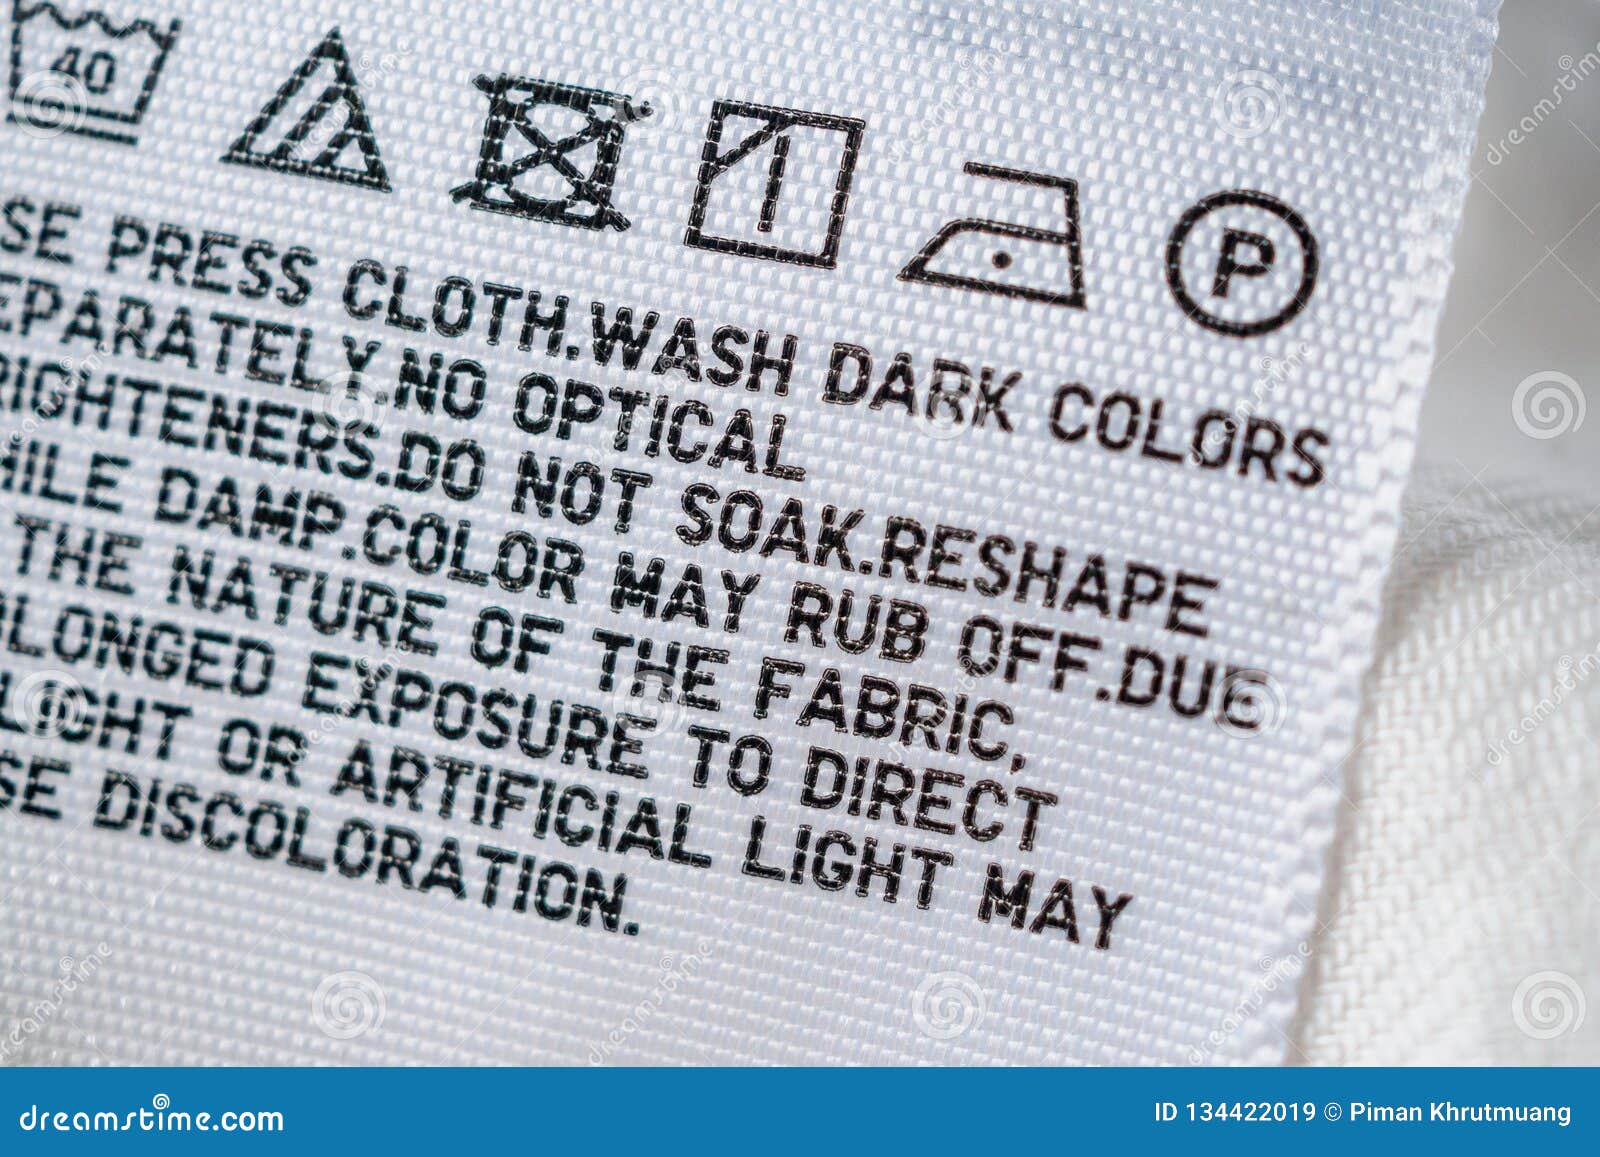 Cloth Label Tag with Laundry Care Instructions Stock Image - Image of ...